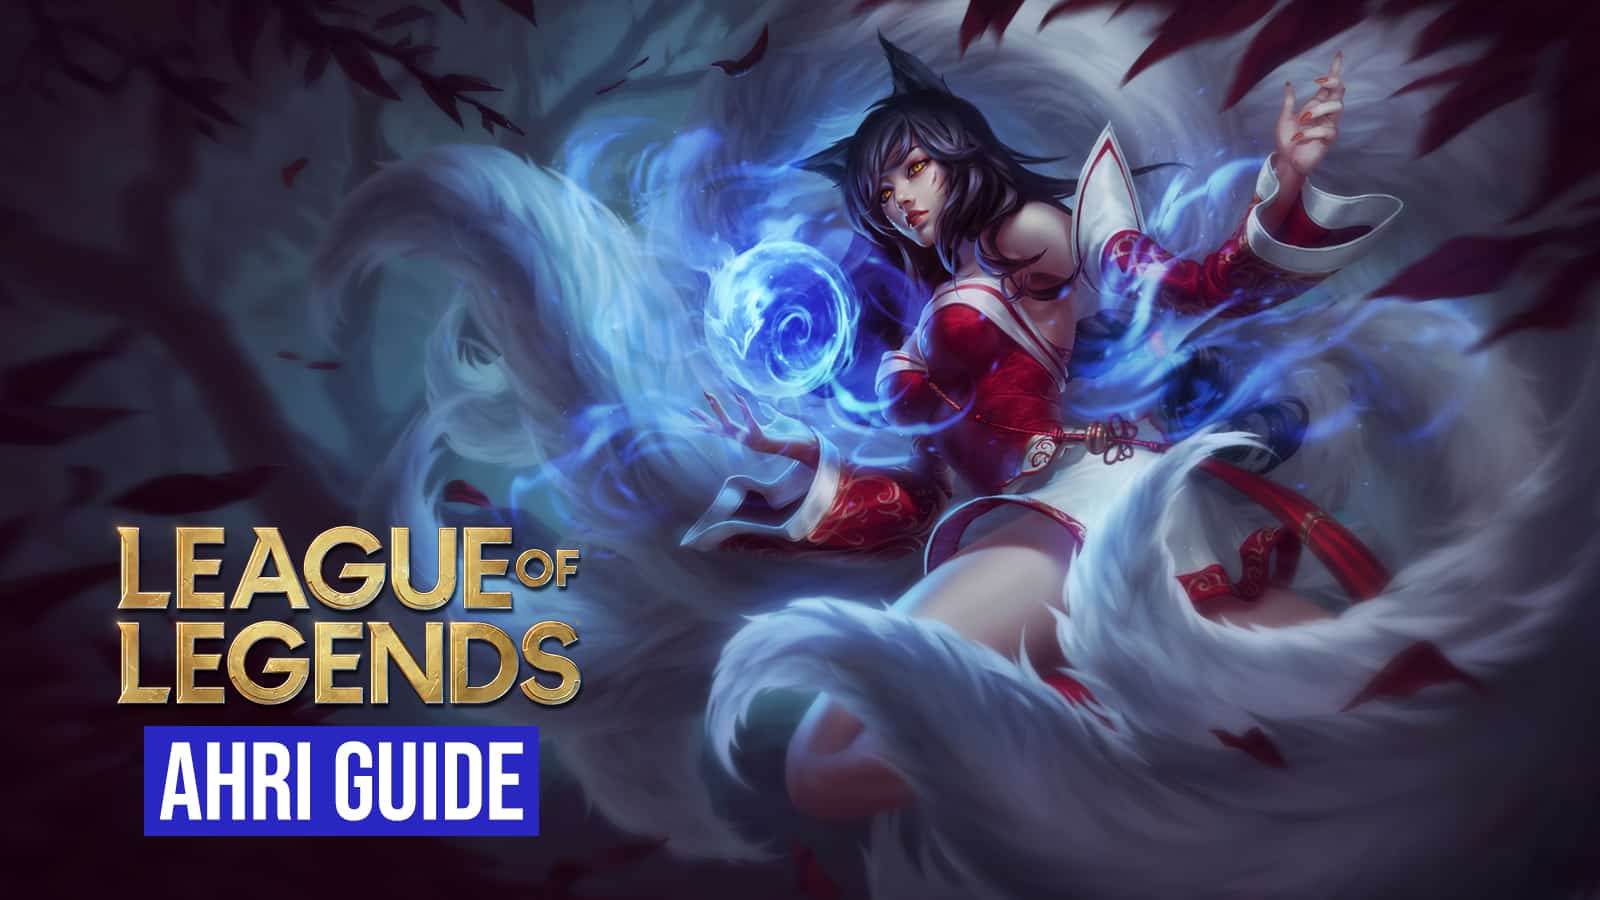 IGN's guide to playing Ahri in League of Legends, including tips and tricks for mastering her abilities.
6. Ahri - League of Legends - OP.GG - wide 4